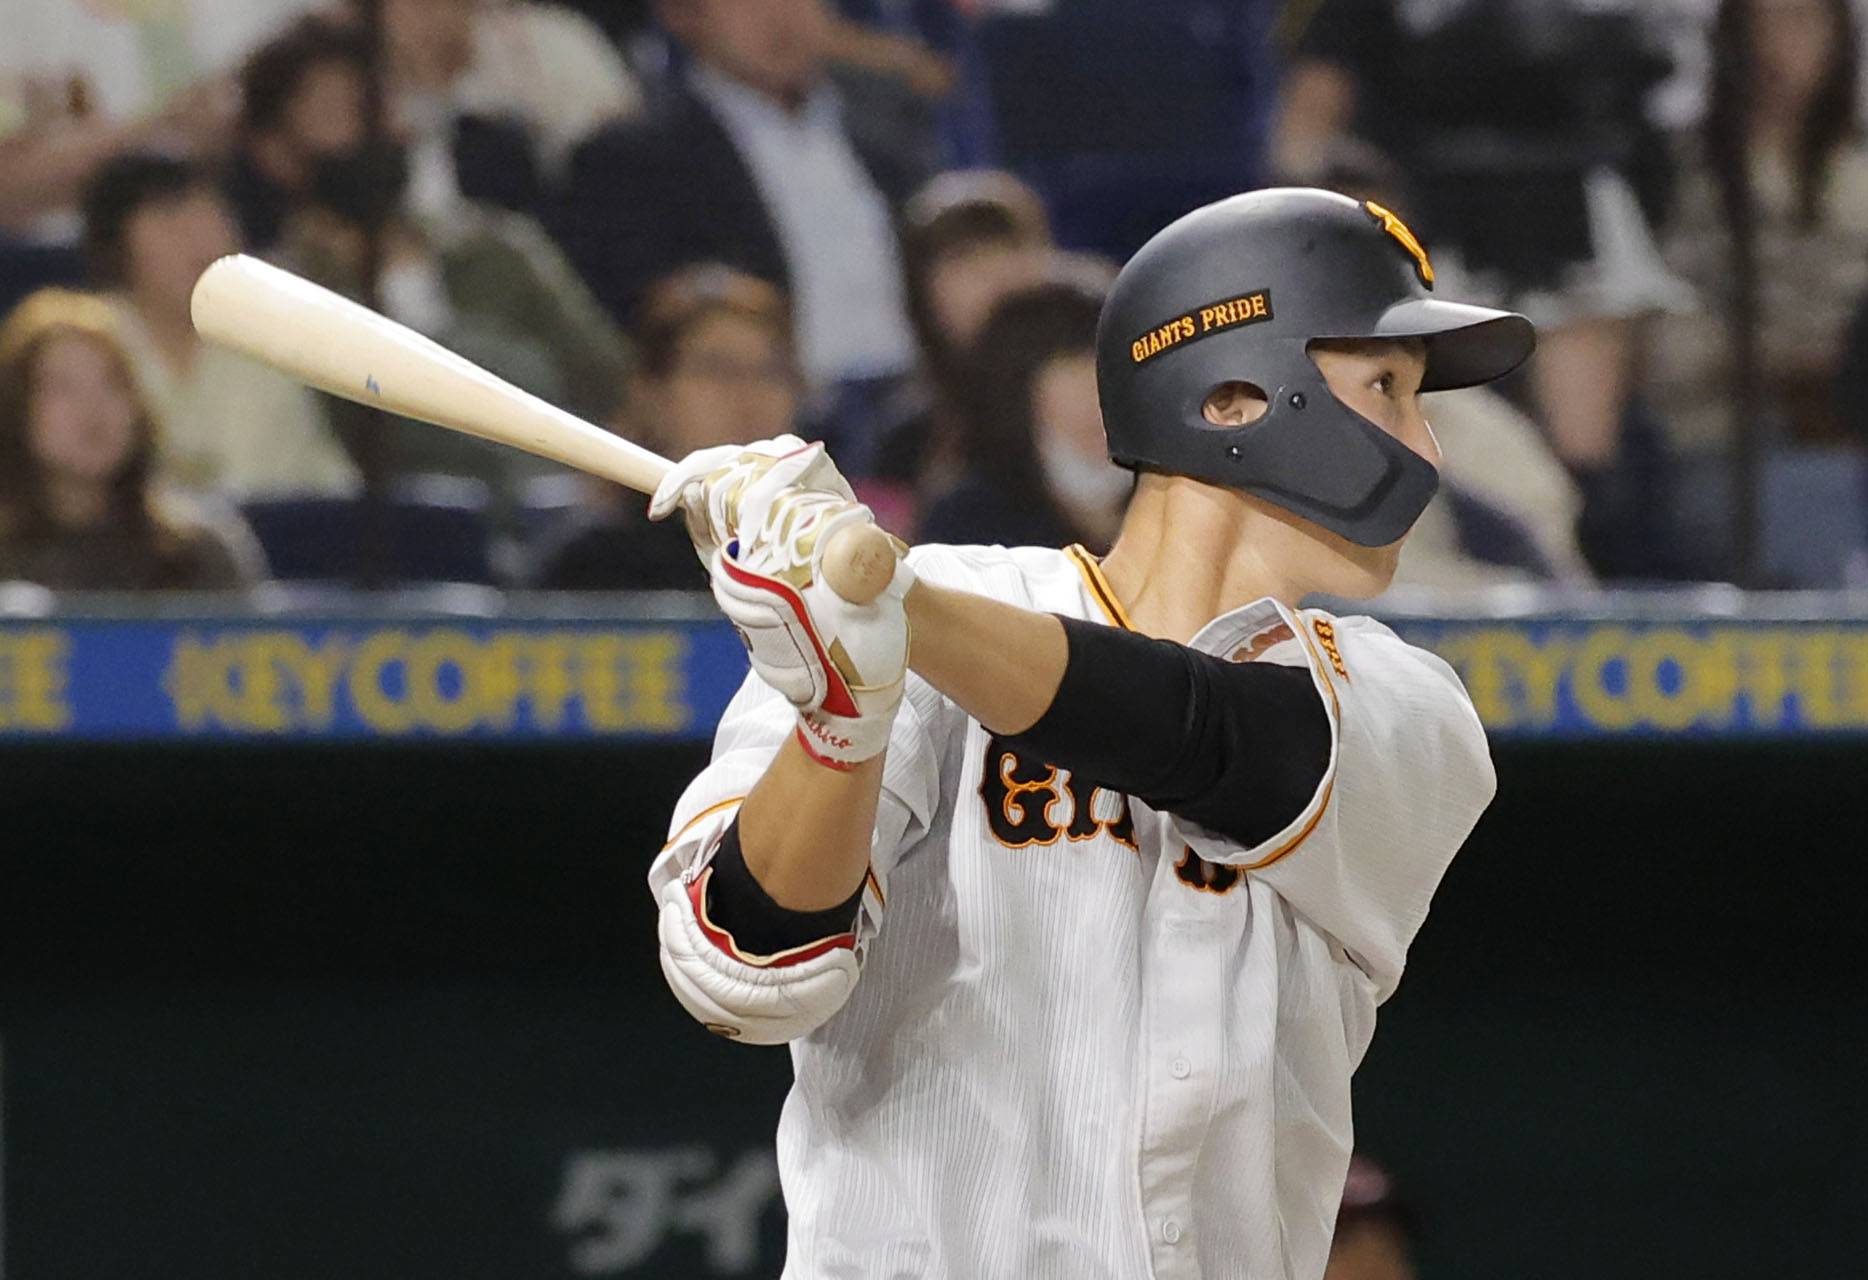 Towering Yuto Akihiro finding chances with struggling Giants